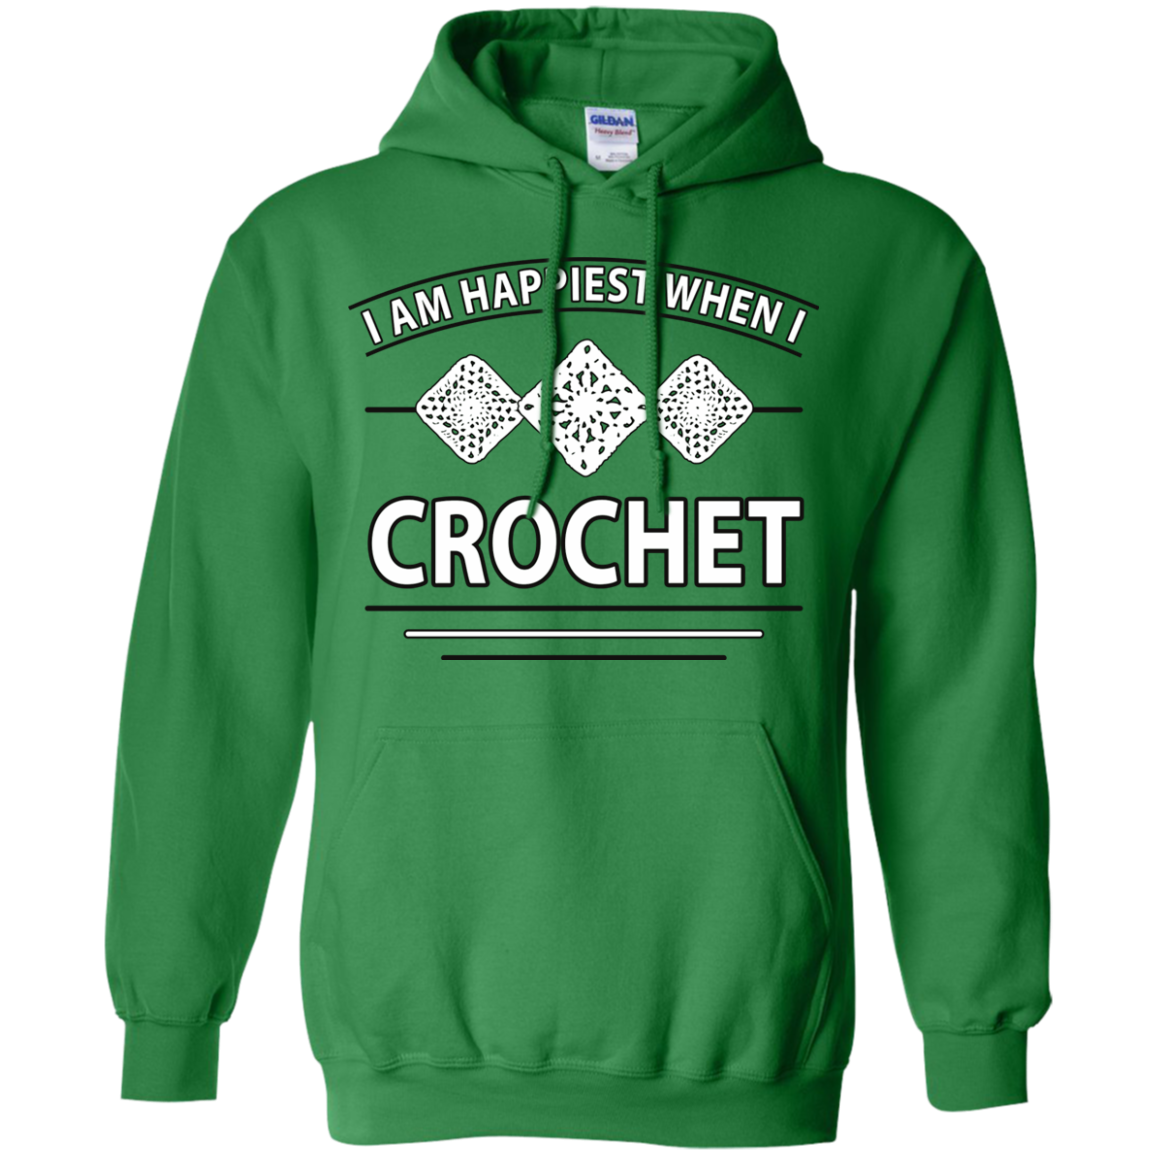 I Am Happiest When I Crochet Pullover Hoodies - Crafter4Life - 3